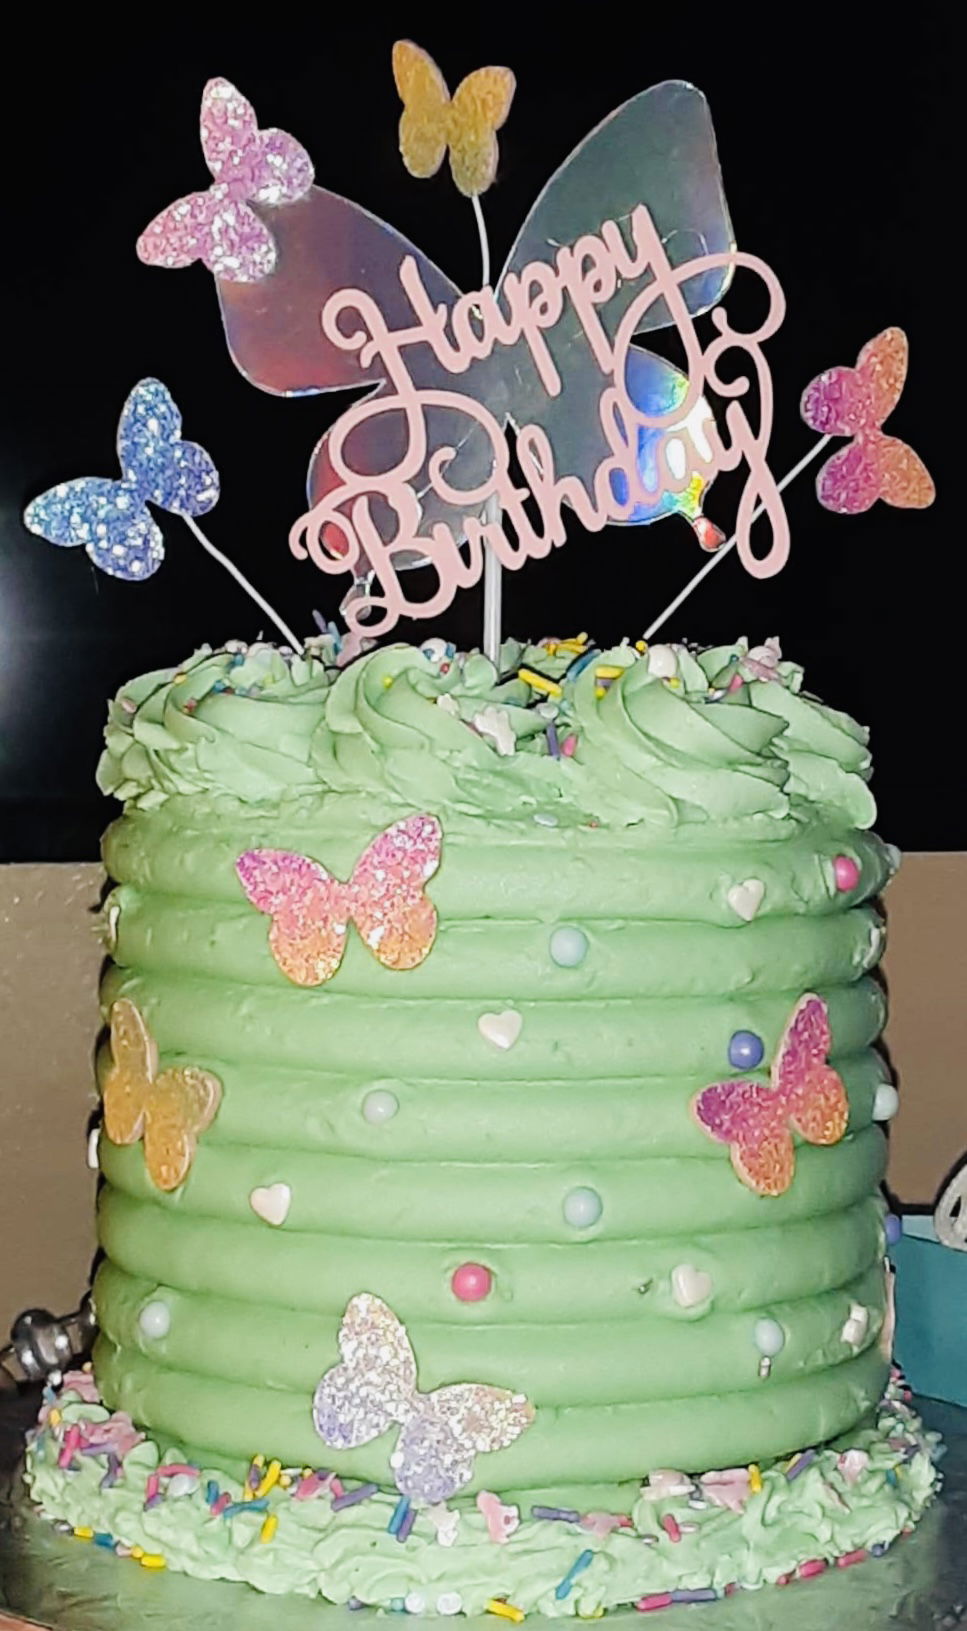 4 Layer Chocolate Butterfly Cake With Buttercream Frosting